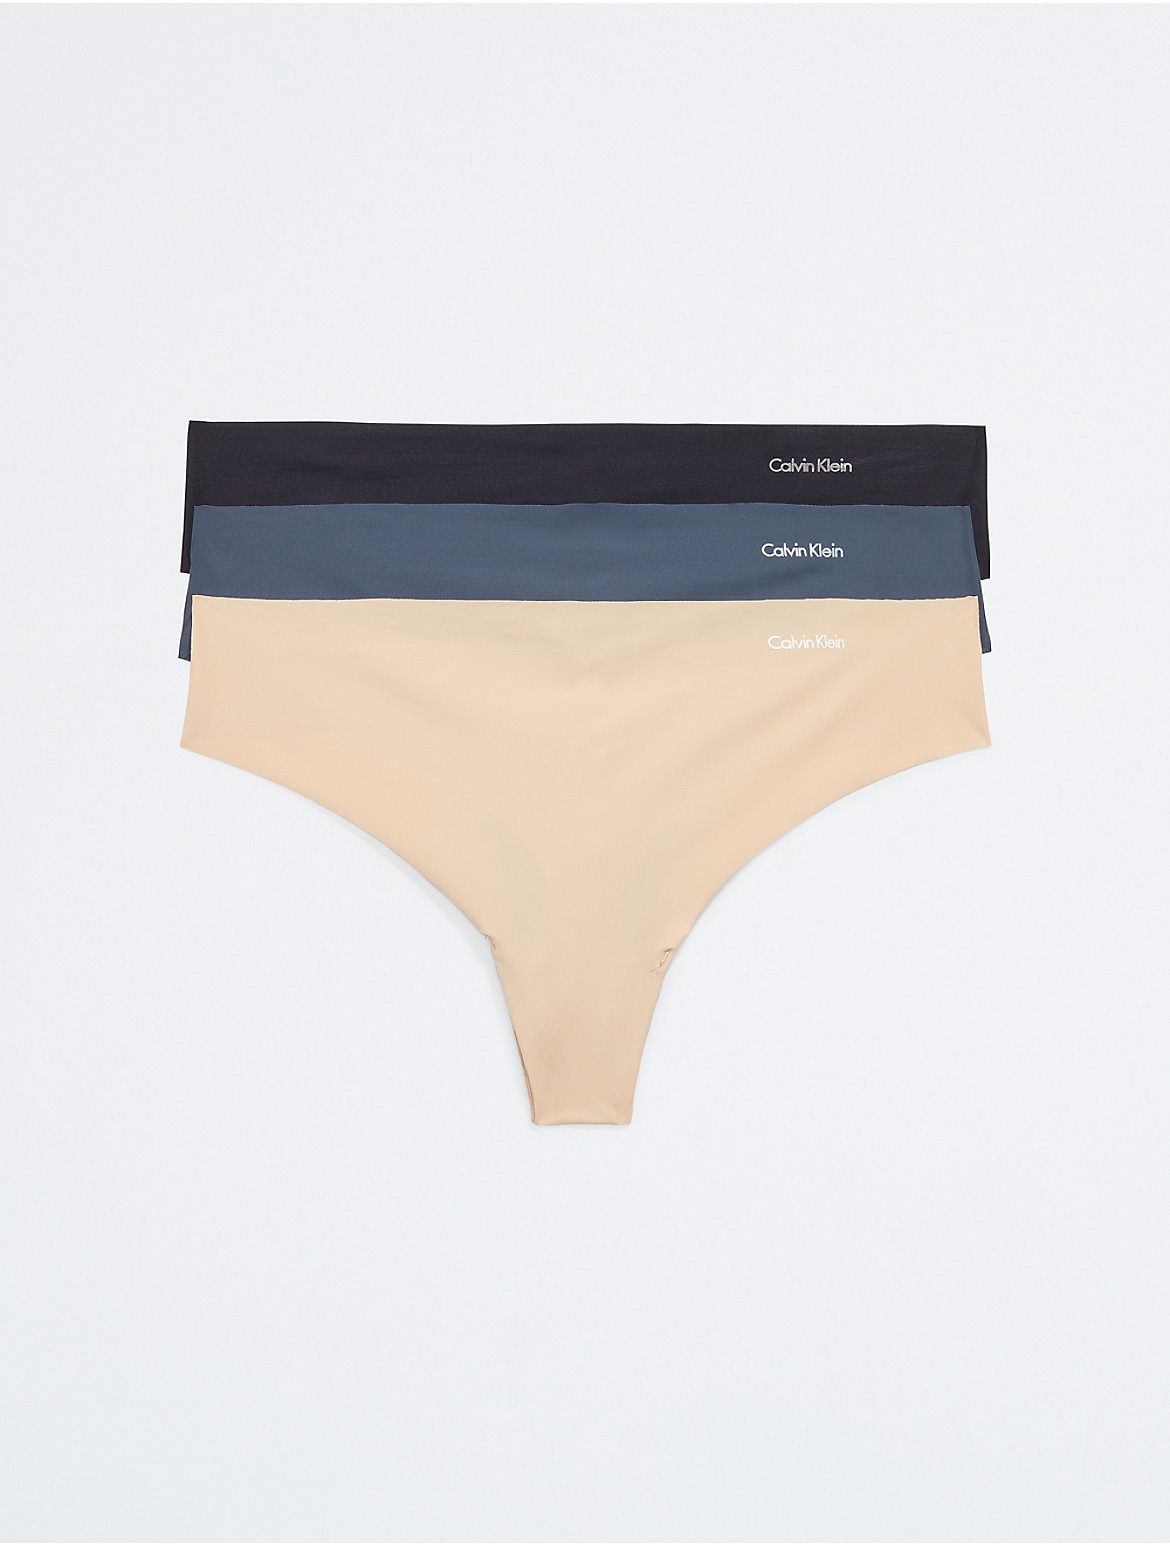 Calvin Klein Women's Invisibles 3-Pack Thong - Multi - XS